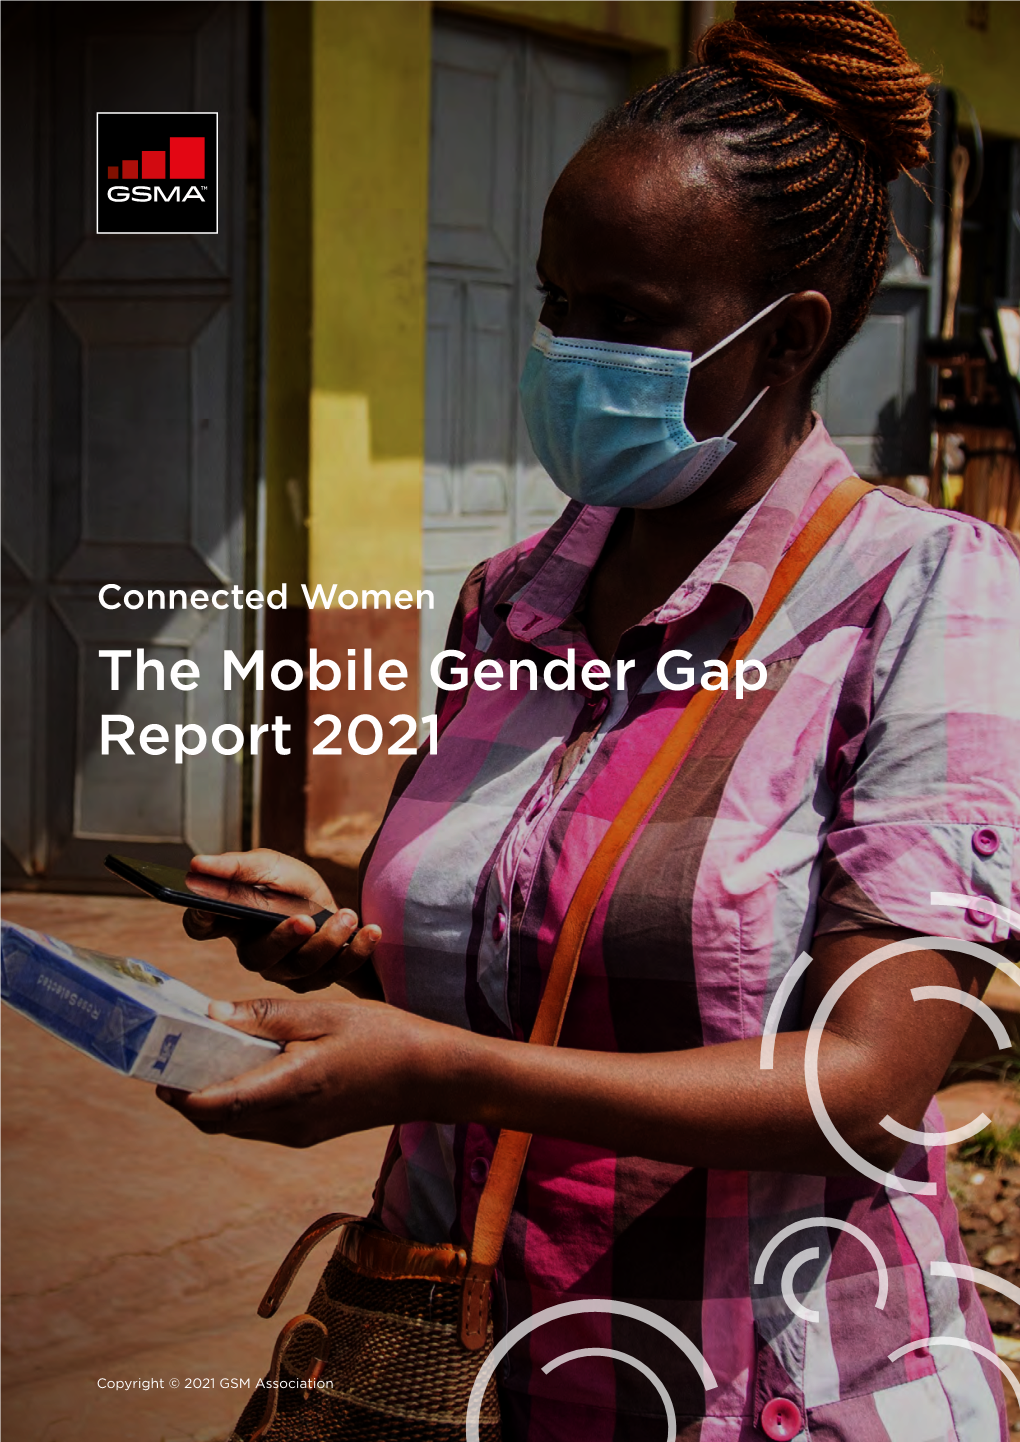 Connected Women – the Mobile Gender Gap Report 2021